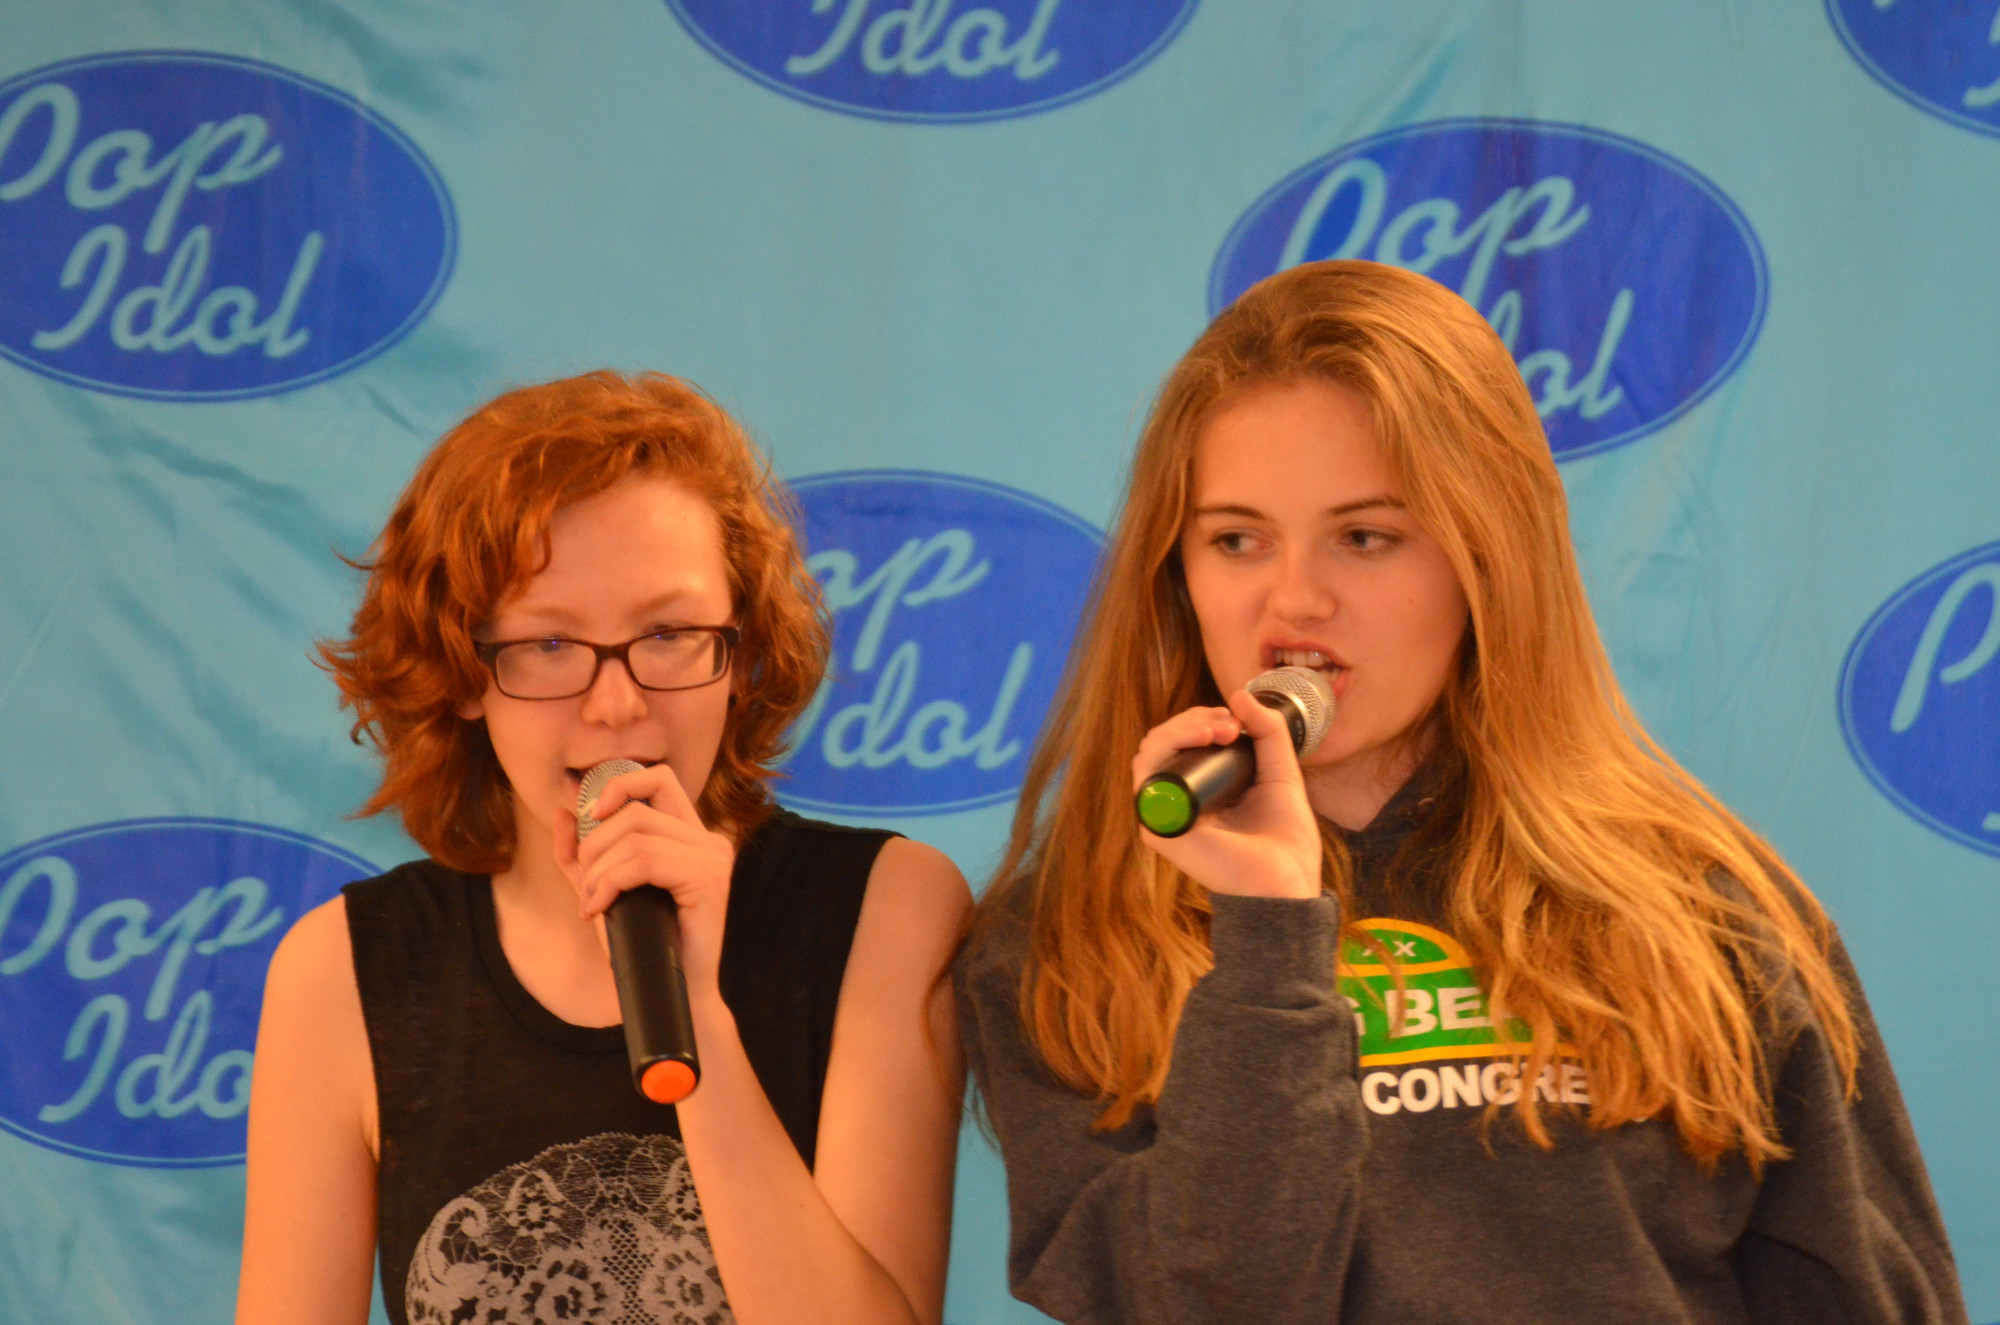 Long Beach High School students Leah Cohen and Ali Thursland performed some karaoke for the crowd at Long Beach AWARE’s Teen Nite Out event on April 15. Photos by Tim Baker/Herald